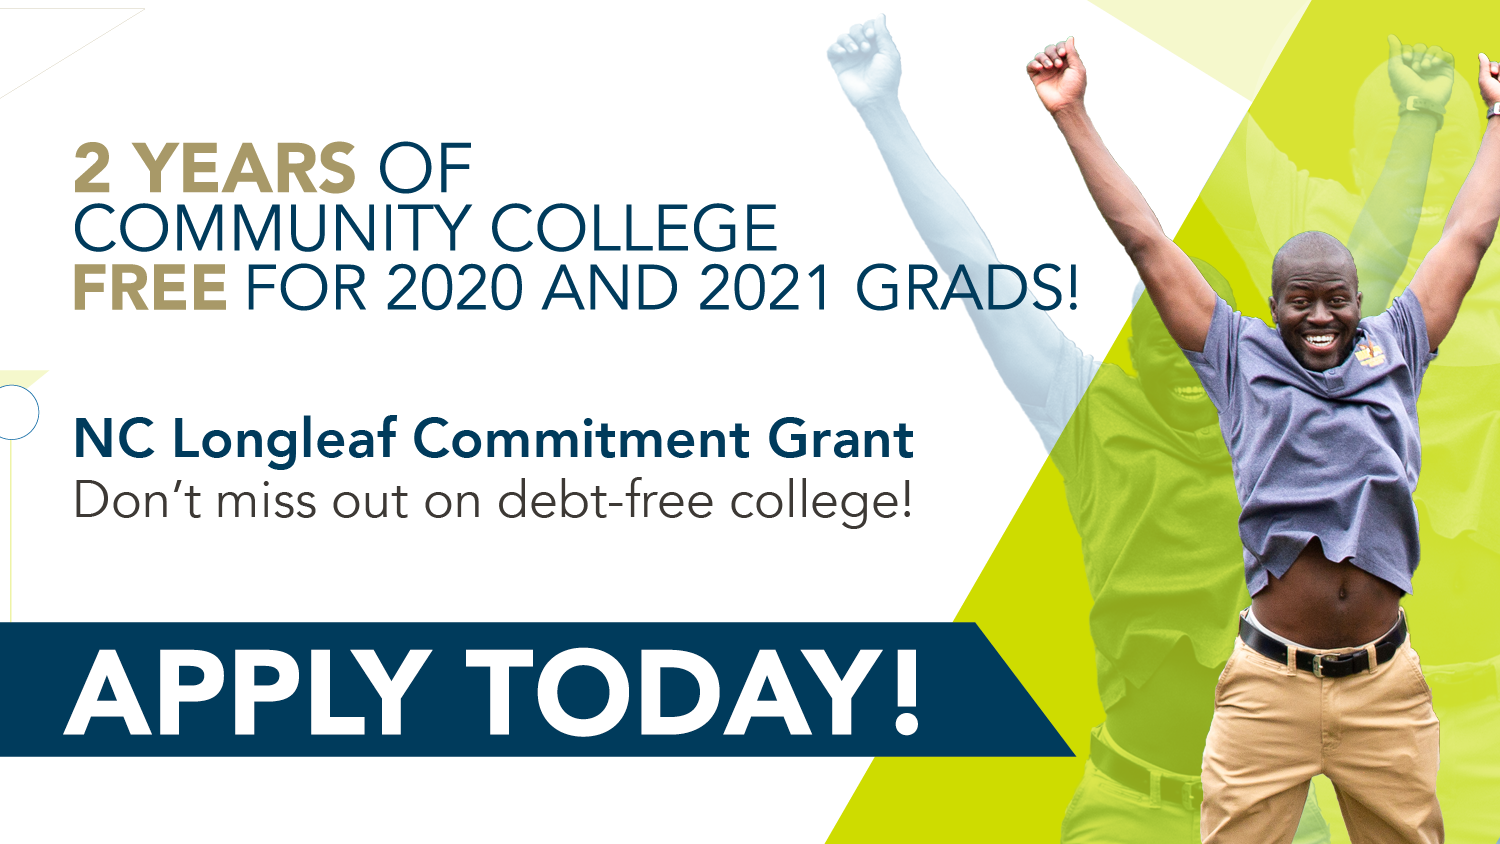 2 Years of Community College free for 2021 Grads! NC Longleaf Commitment Grant. Don't miss out on debt-free college!